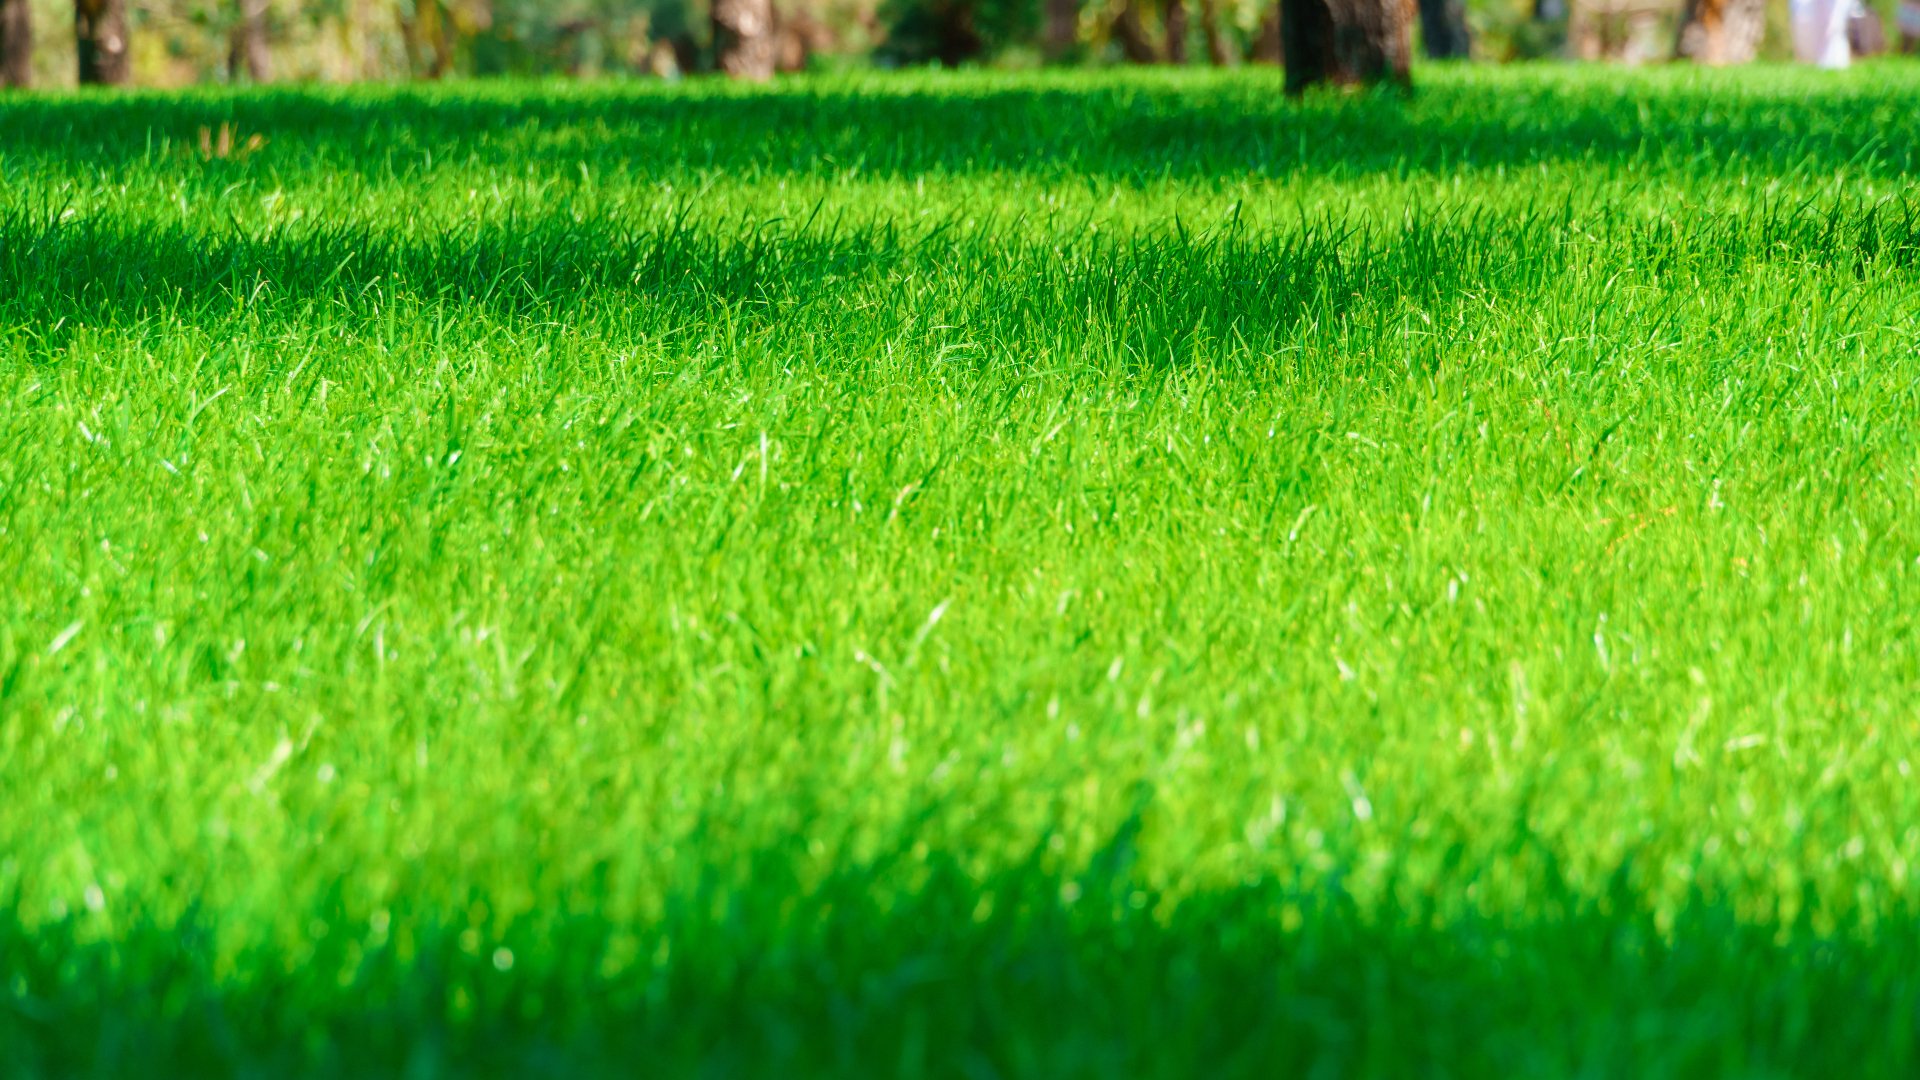 What Nutrients Does Your Lawn Need to Grow Healthy & Beautiful?